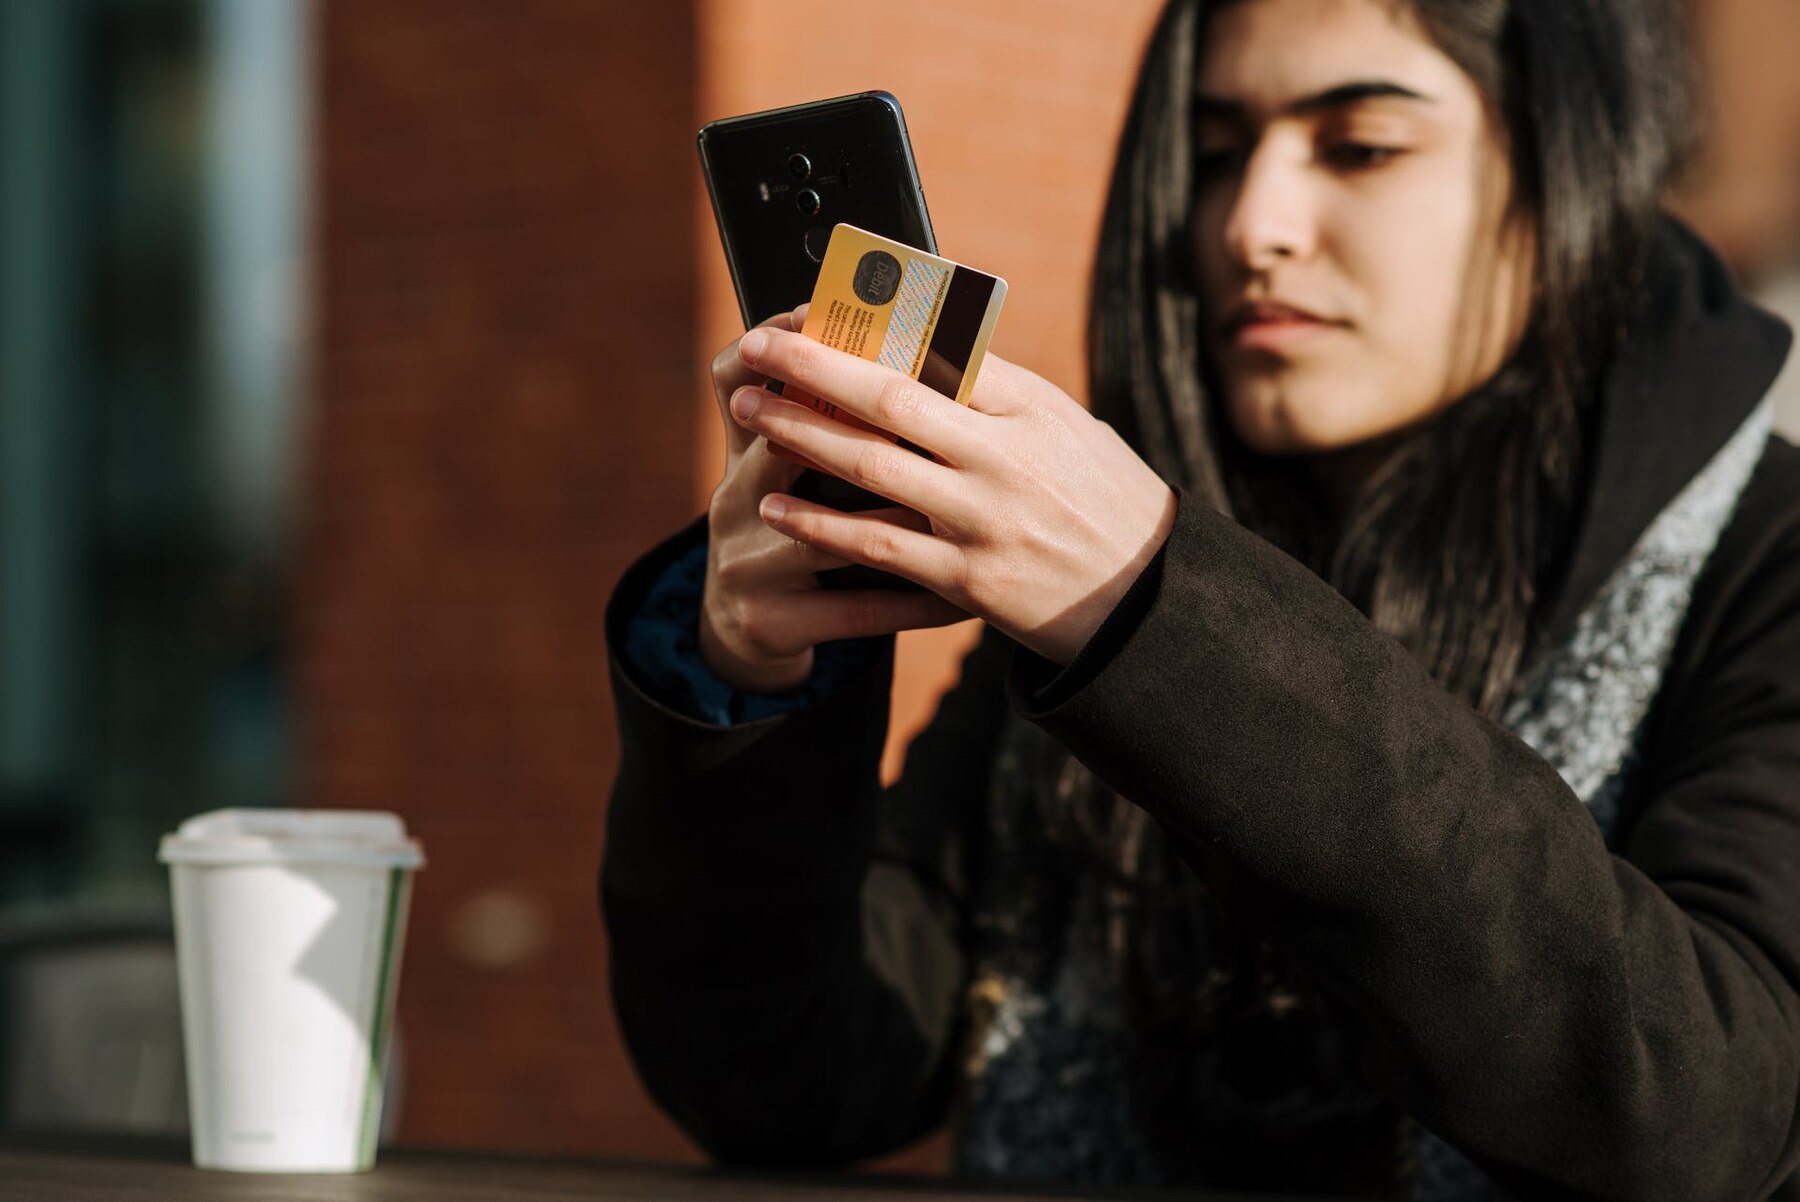 A woman holding a credit card and a smartphone